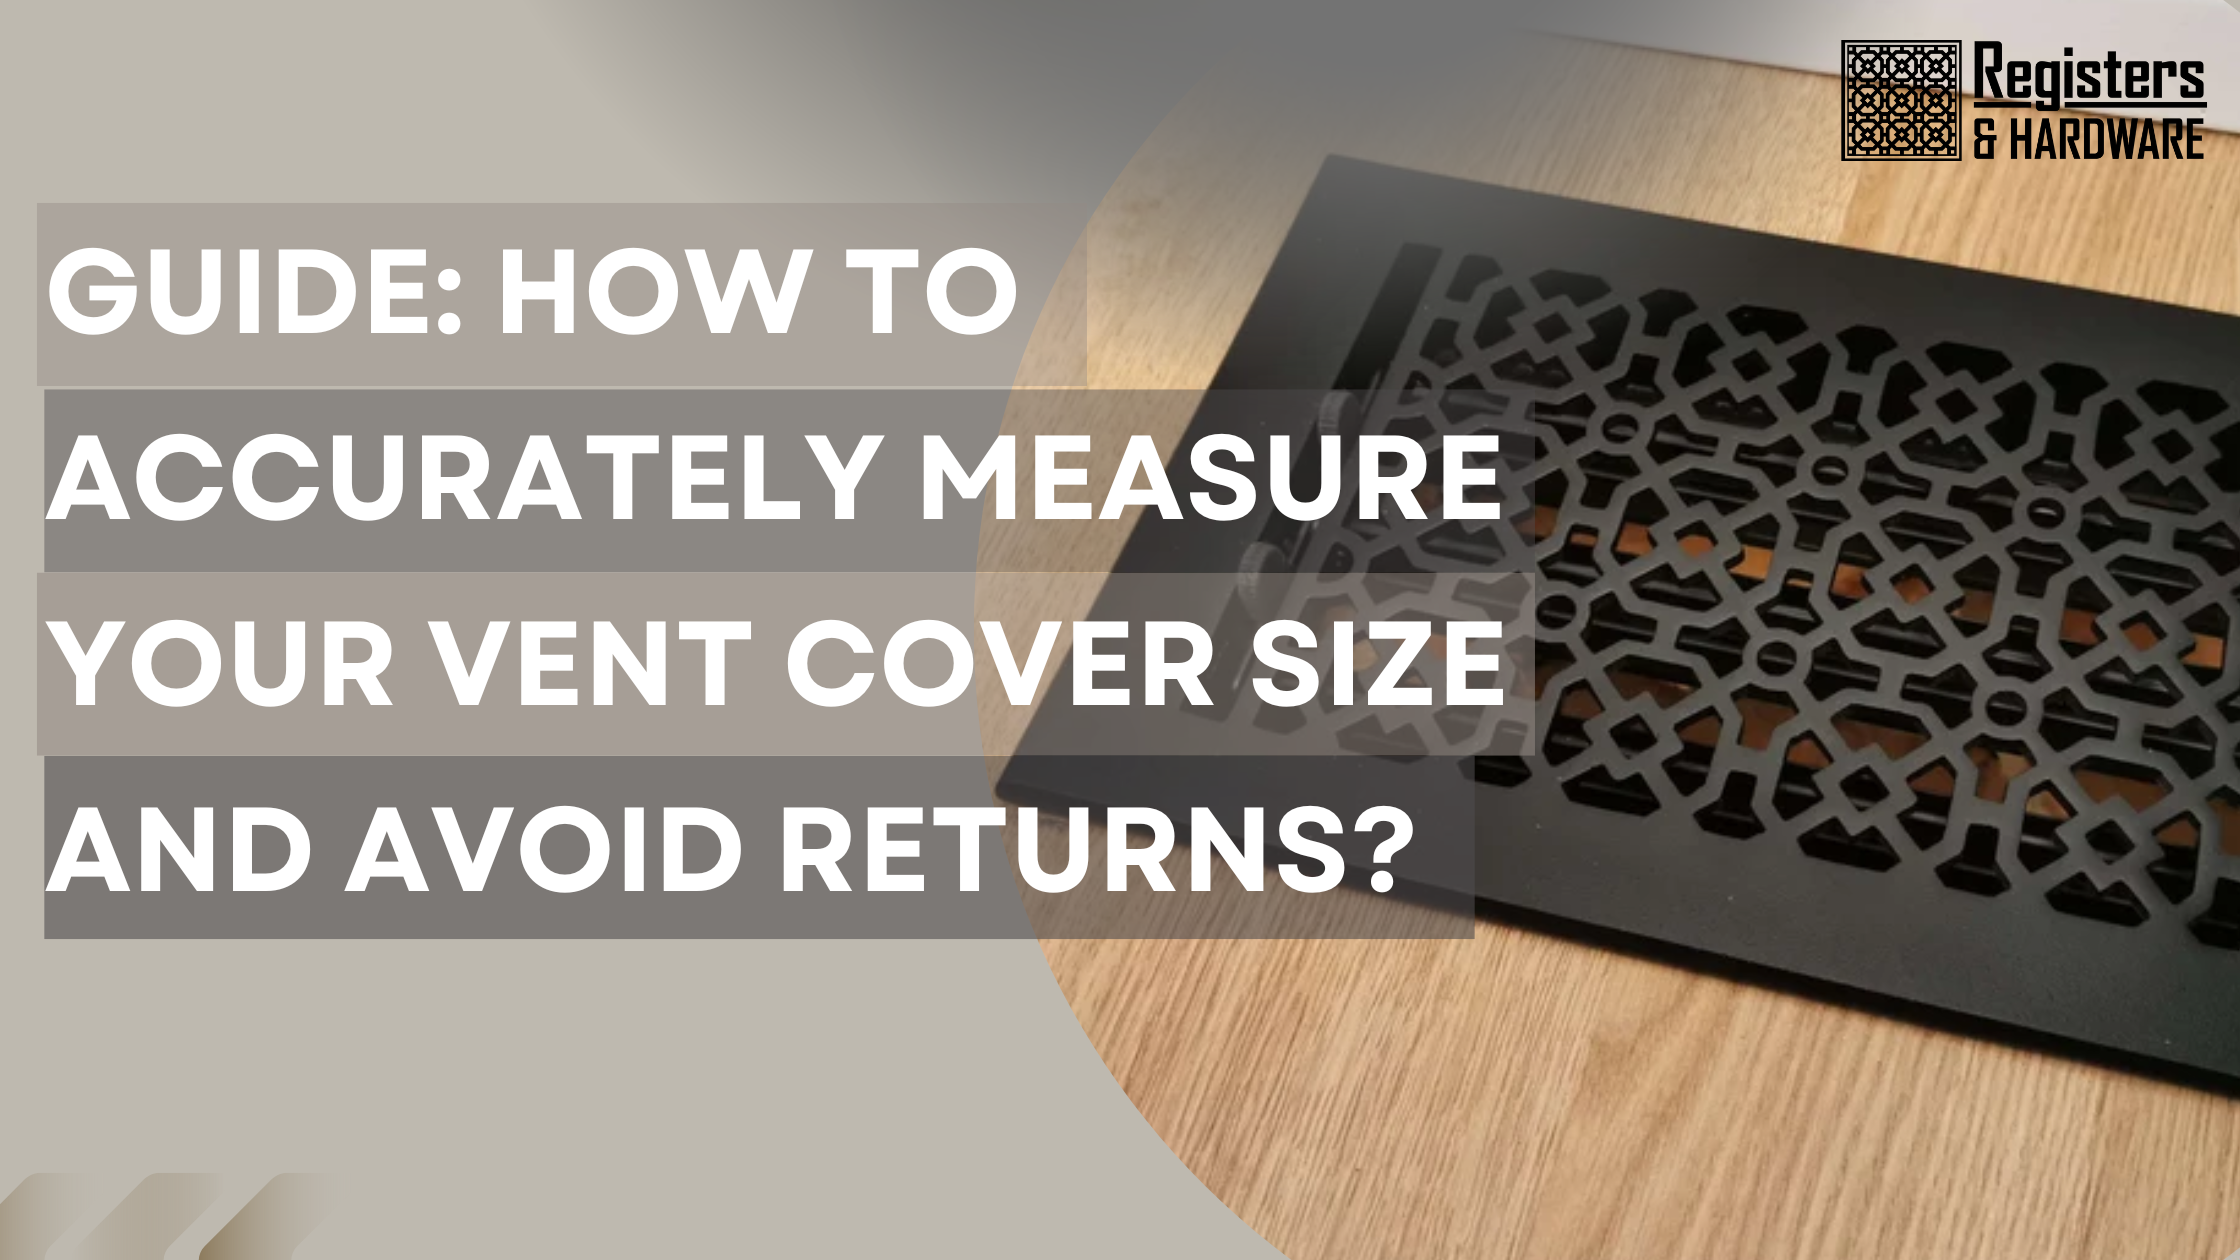 Guide: How to Accurately Measure your Vent Cover Size and Avoid Returns?